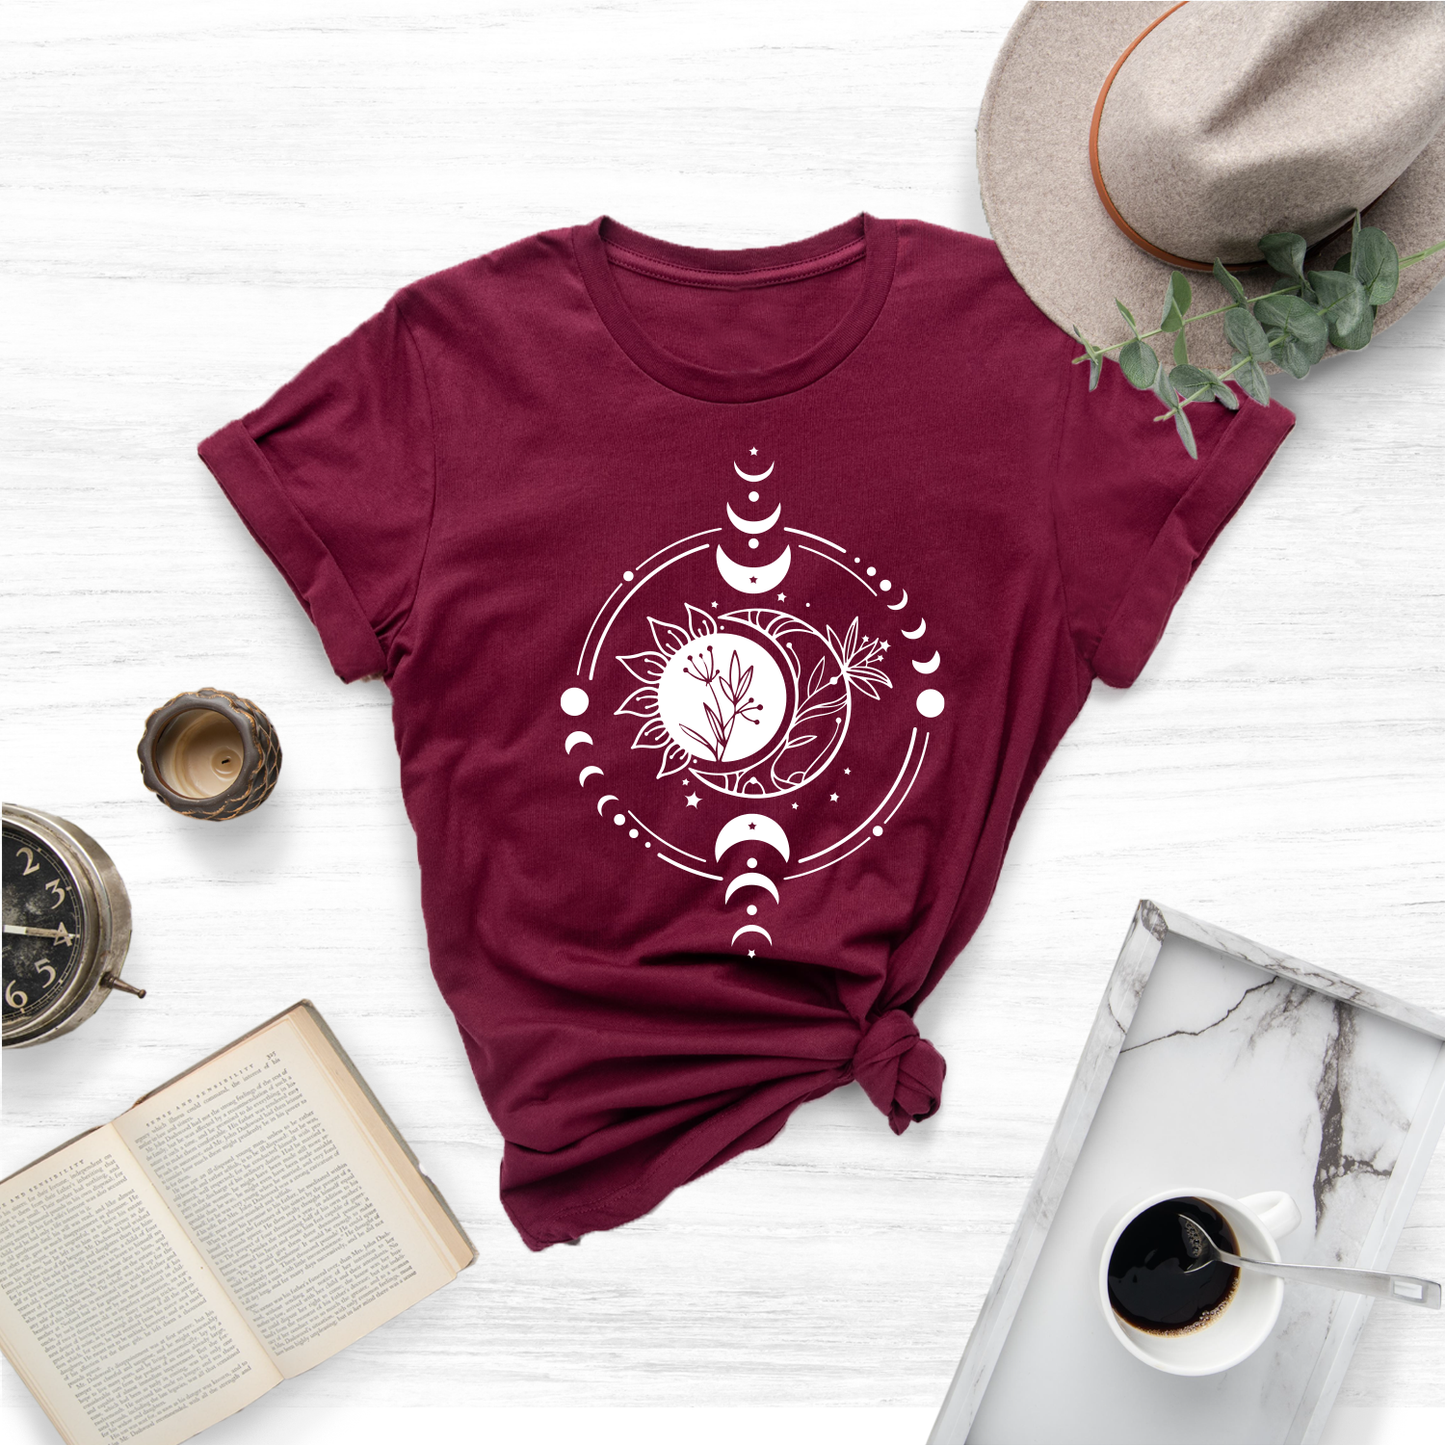 Embrace the celestial beauty and cosmic energy with our Mystic Moon And Sun Shirt, Moon Phase T-Shirt, the perfect way to express your connection to the cycles of the moon and the radiance of the sun.